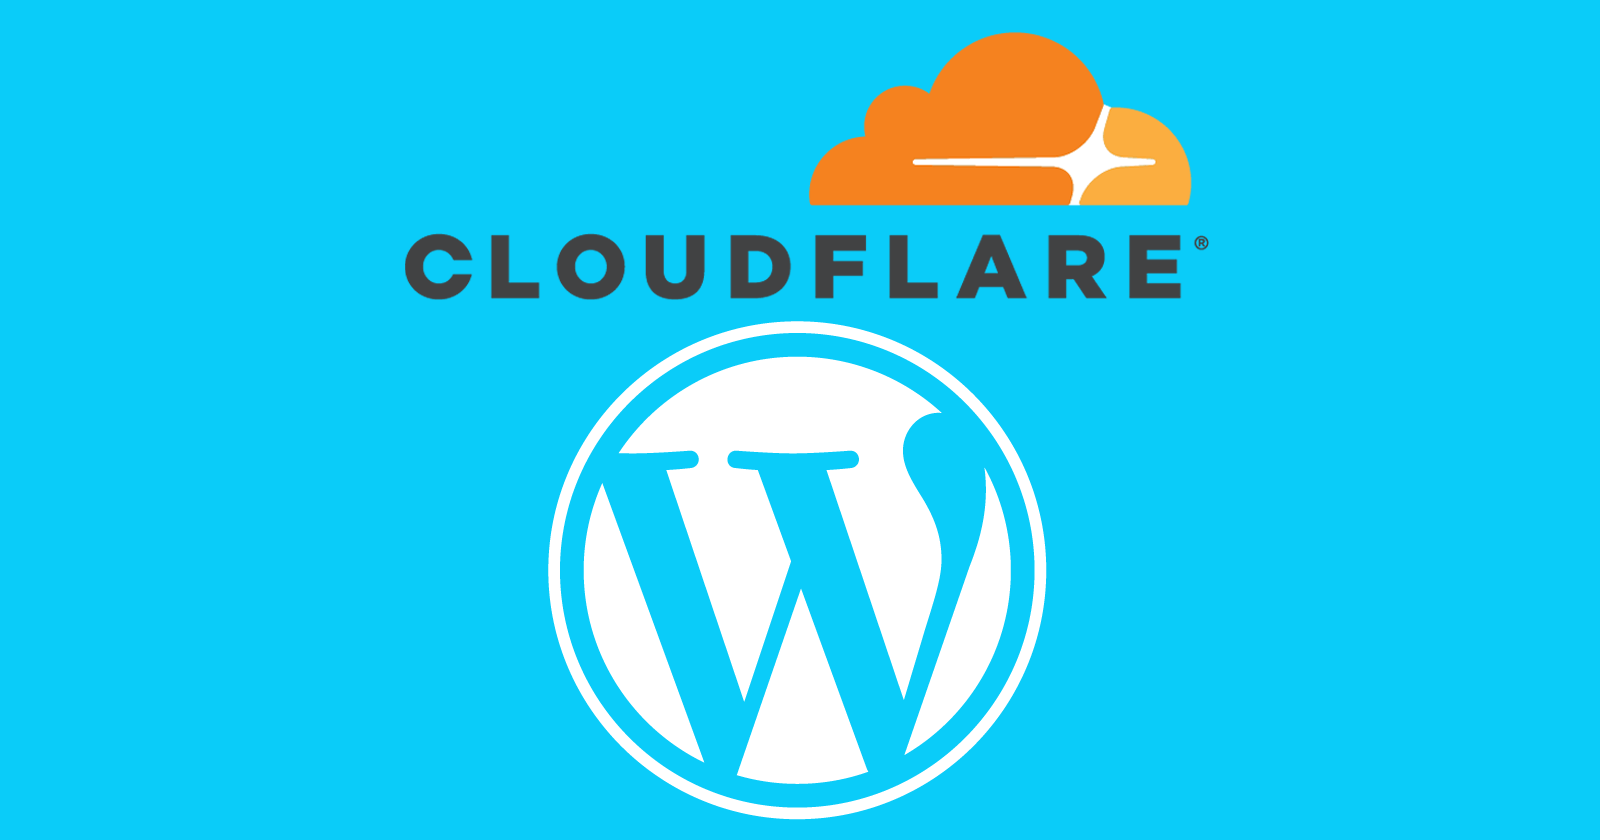 Image of the Cloudflare and WordPress logos